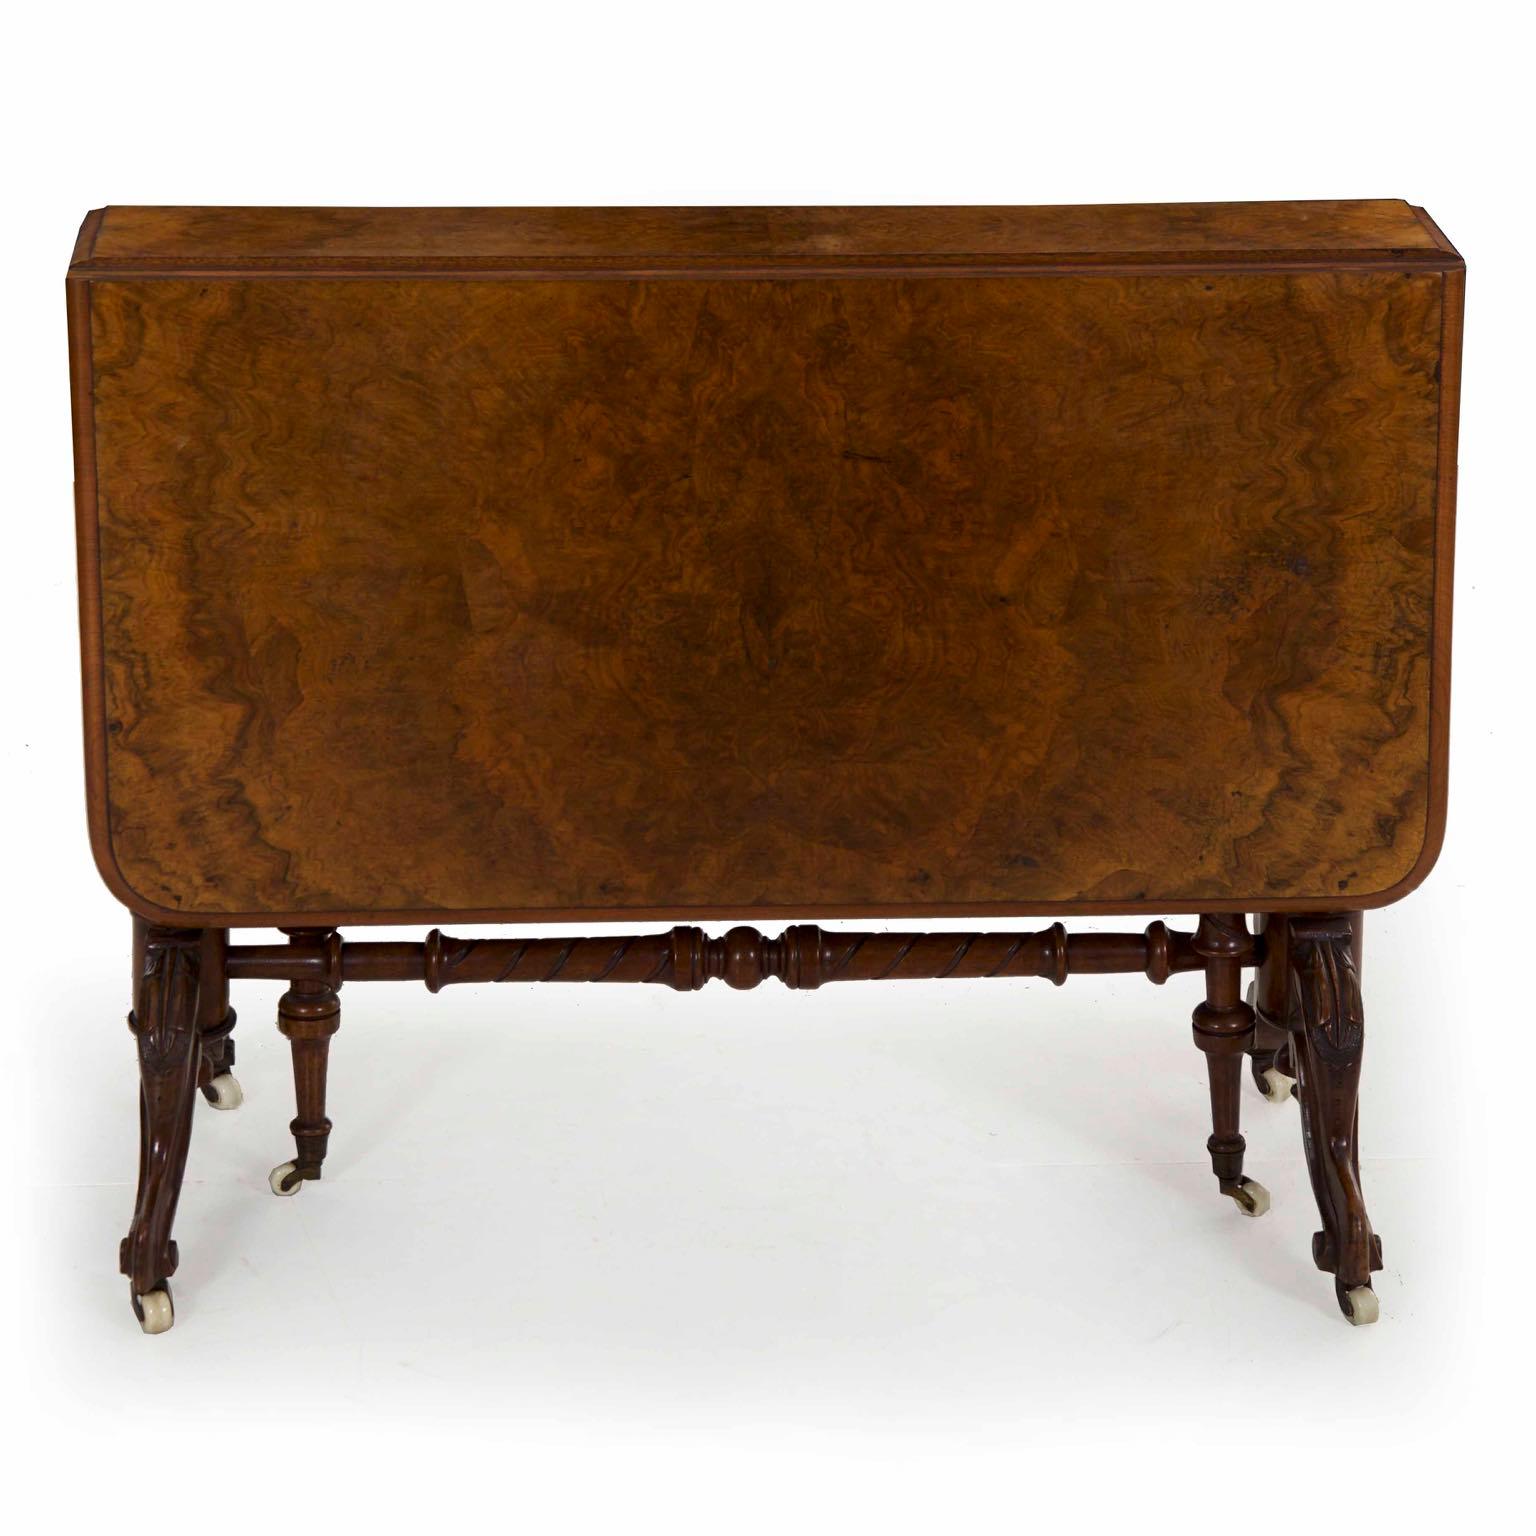 Victorian burl walnut and carved mahogany Sunderland table
England, circa third quarter of the 19th century


This table form is generally known as “Sunderland”, being characterized by a somewhat extreme shallowness of depth with long drop